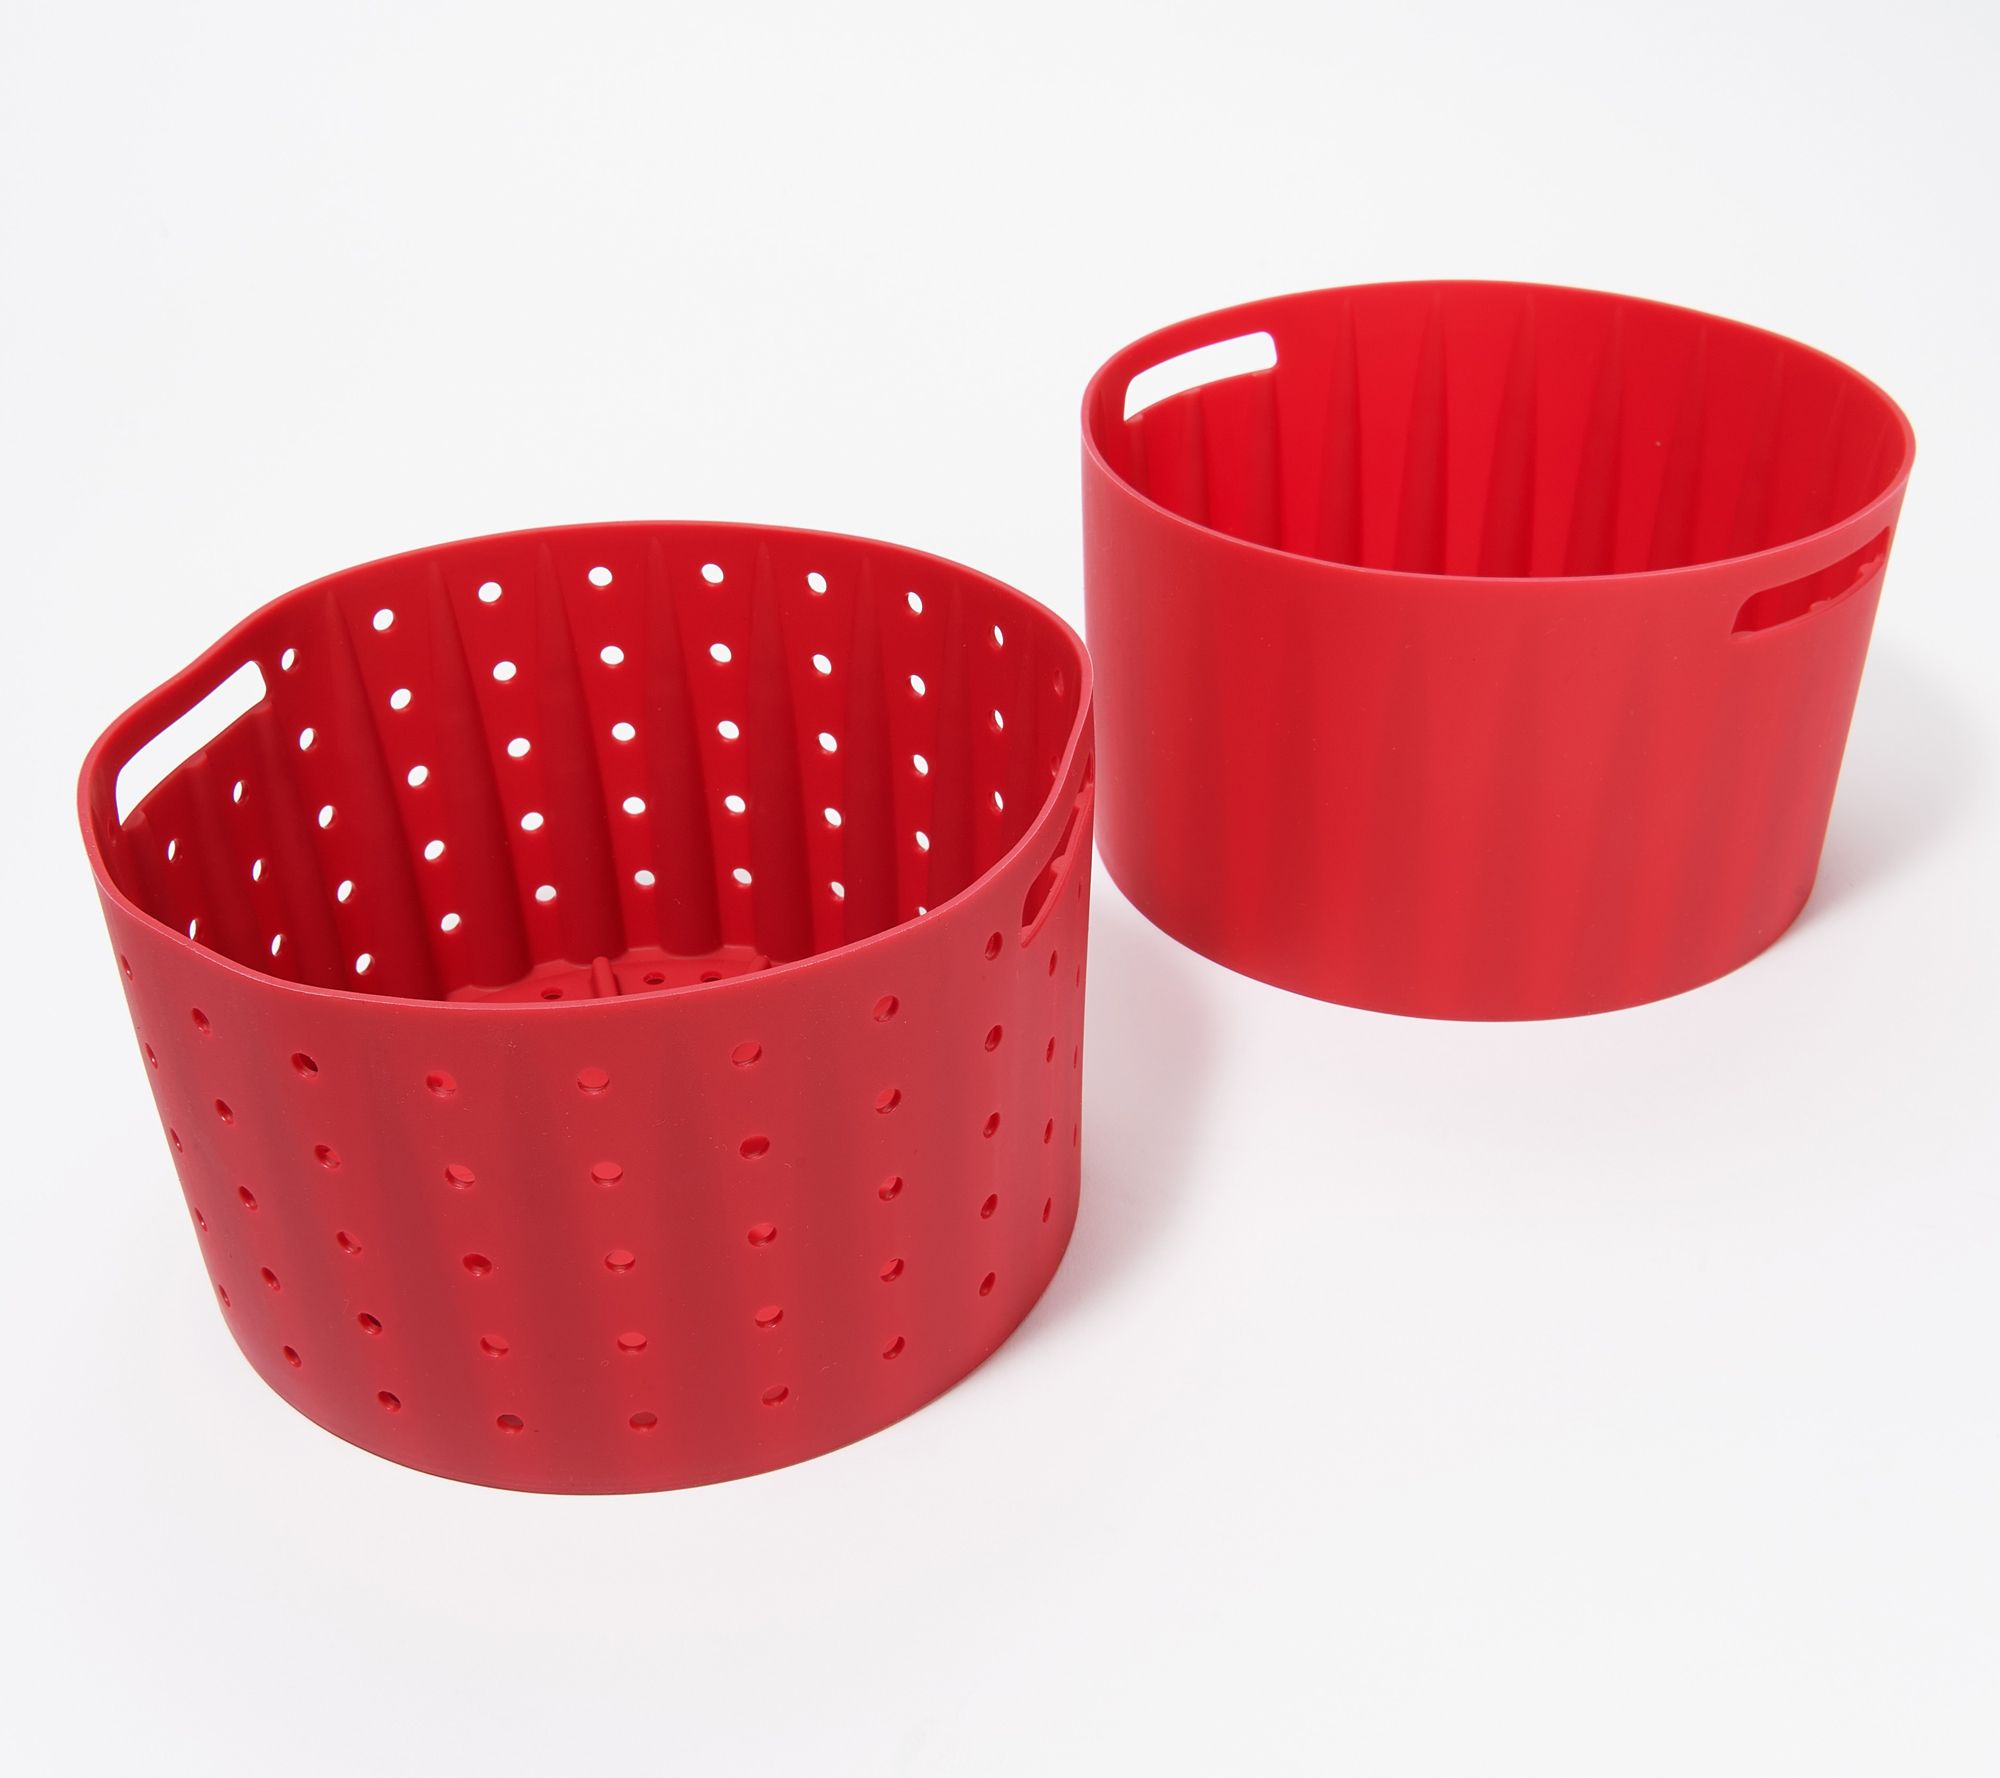 Air Fryer Basket Liners - Round, 24, Low Vision Cooking